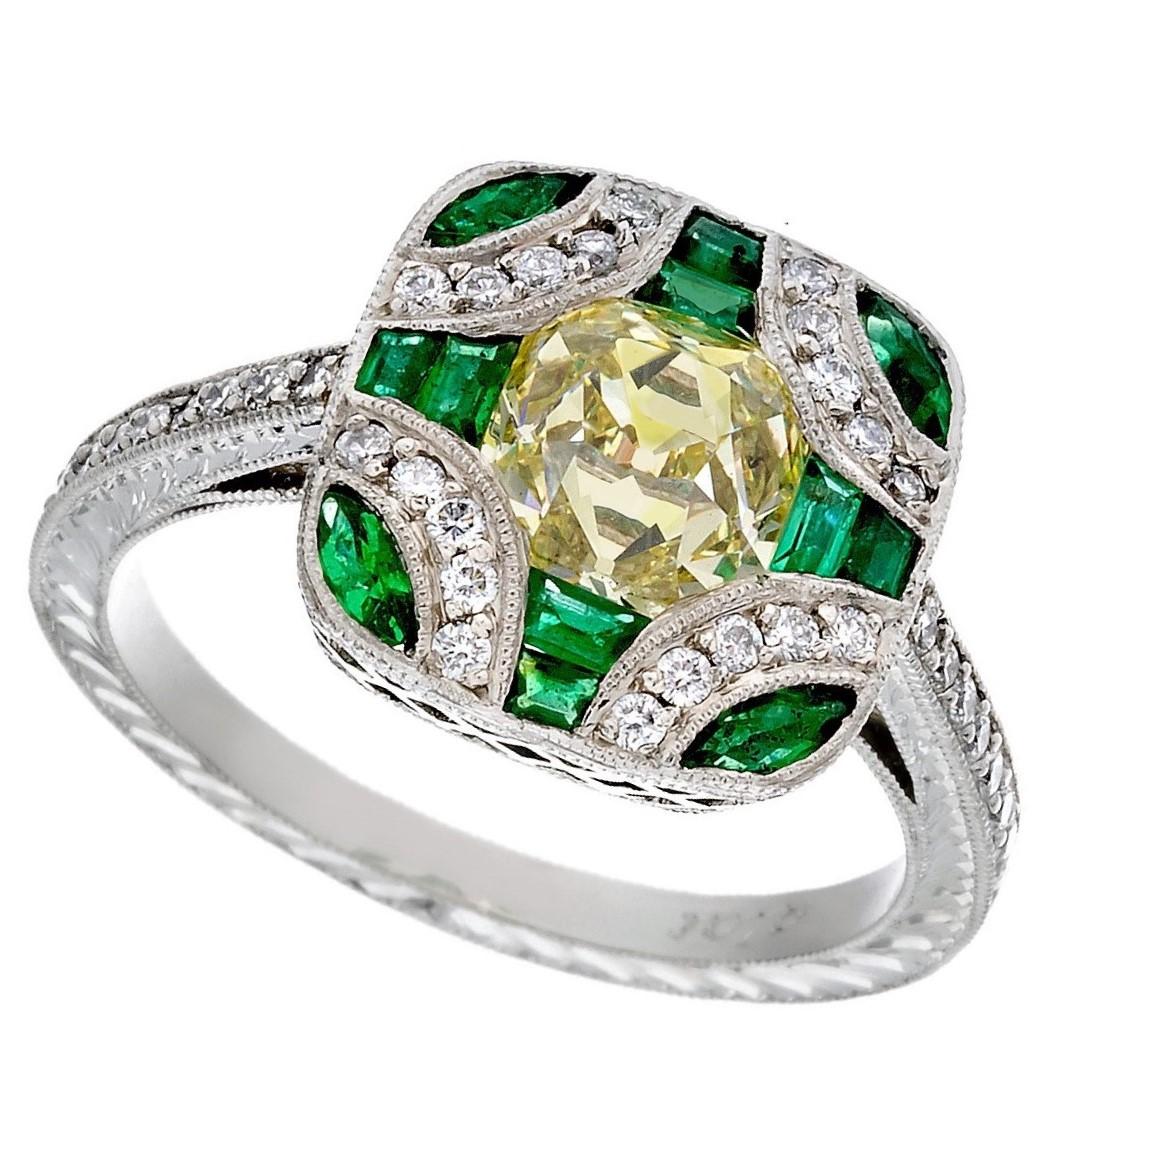 Antique Edwardian Style Fancy Yellow Old Mine Cut Diamond and Emerald Ring For Sale 2